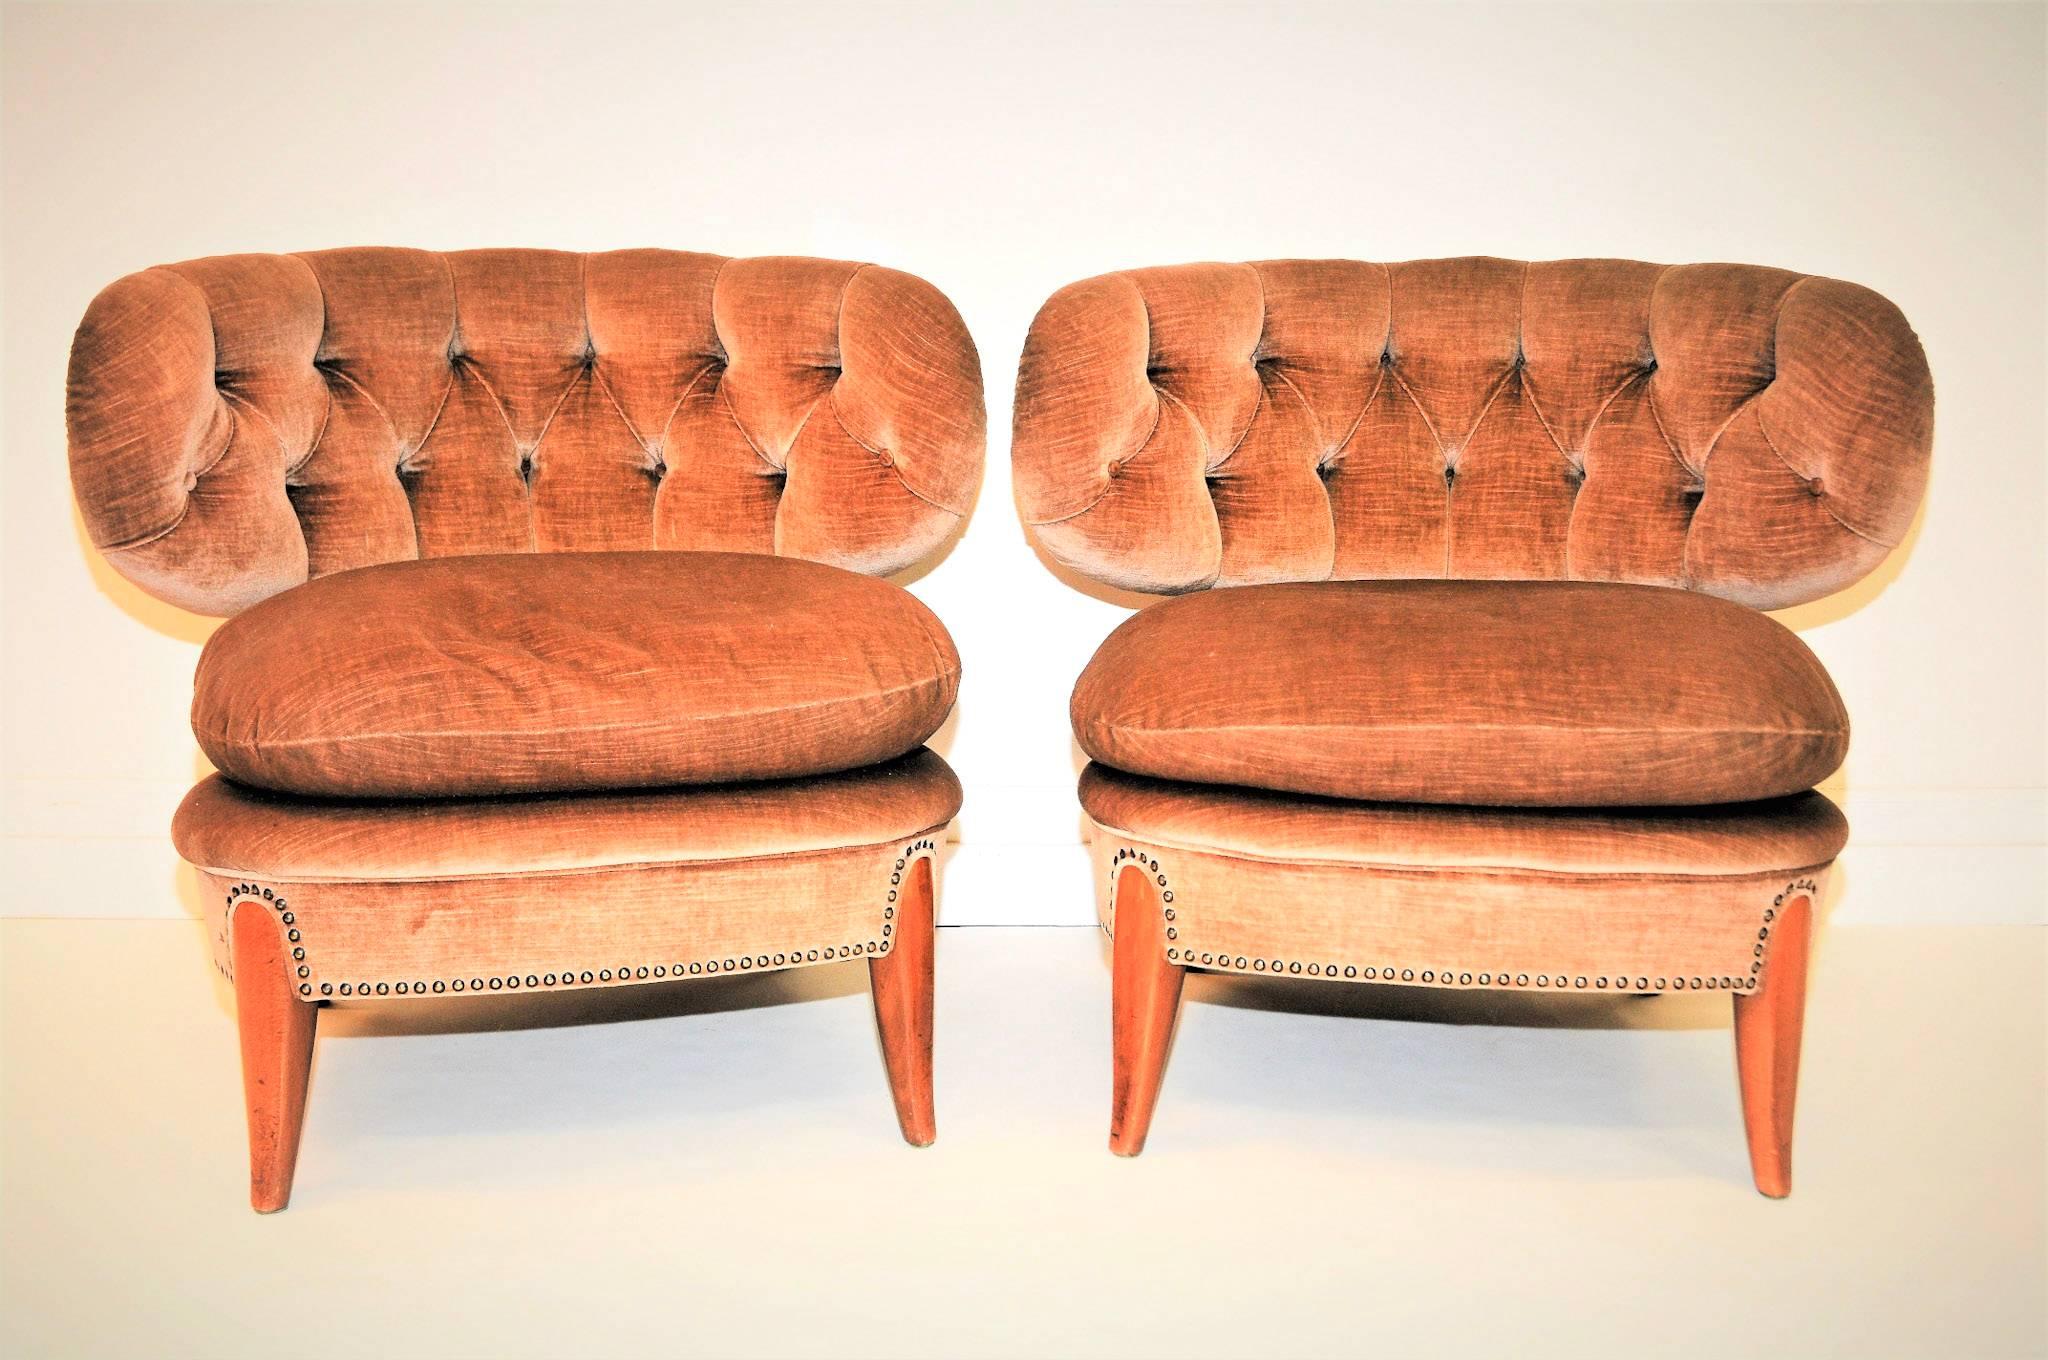 This pair of chairs by Otto Schulz for the Boet in Gothenburg, Sweden was one of the best sellers in the 1940s. With its generous seat and back, and not least the soft cushion, it invites you to a comfortable sitting. Color of beige/brown velvet.